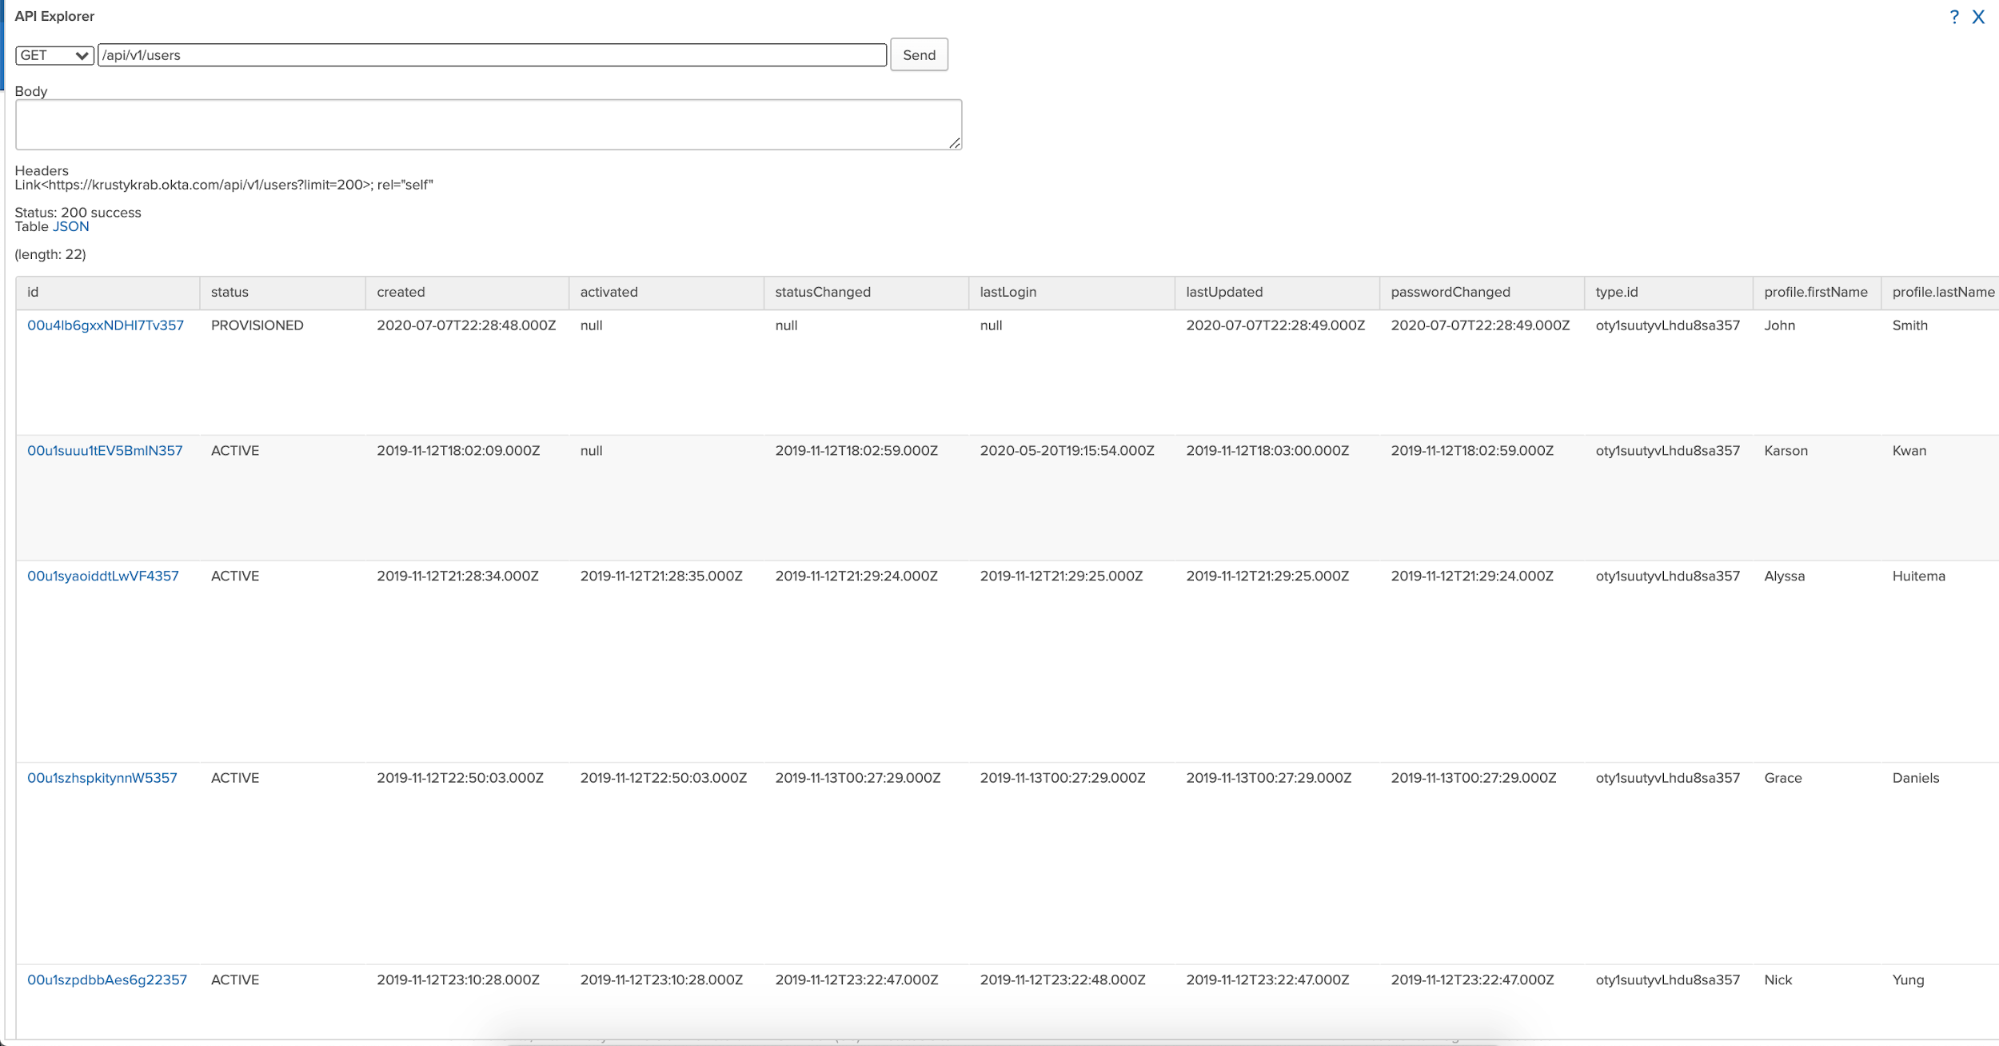 What the rockstar API explorer looks like when a list of users is displayed